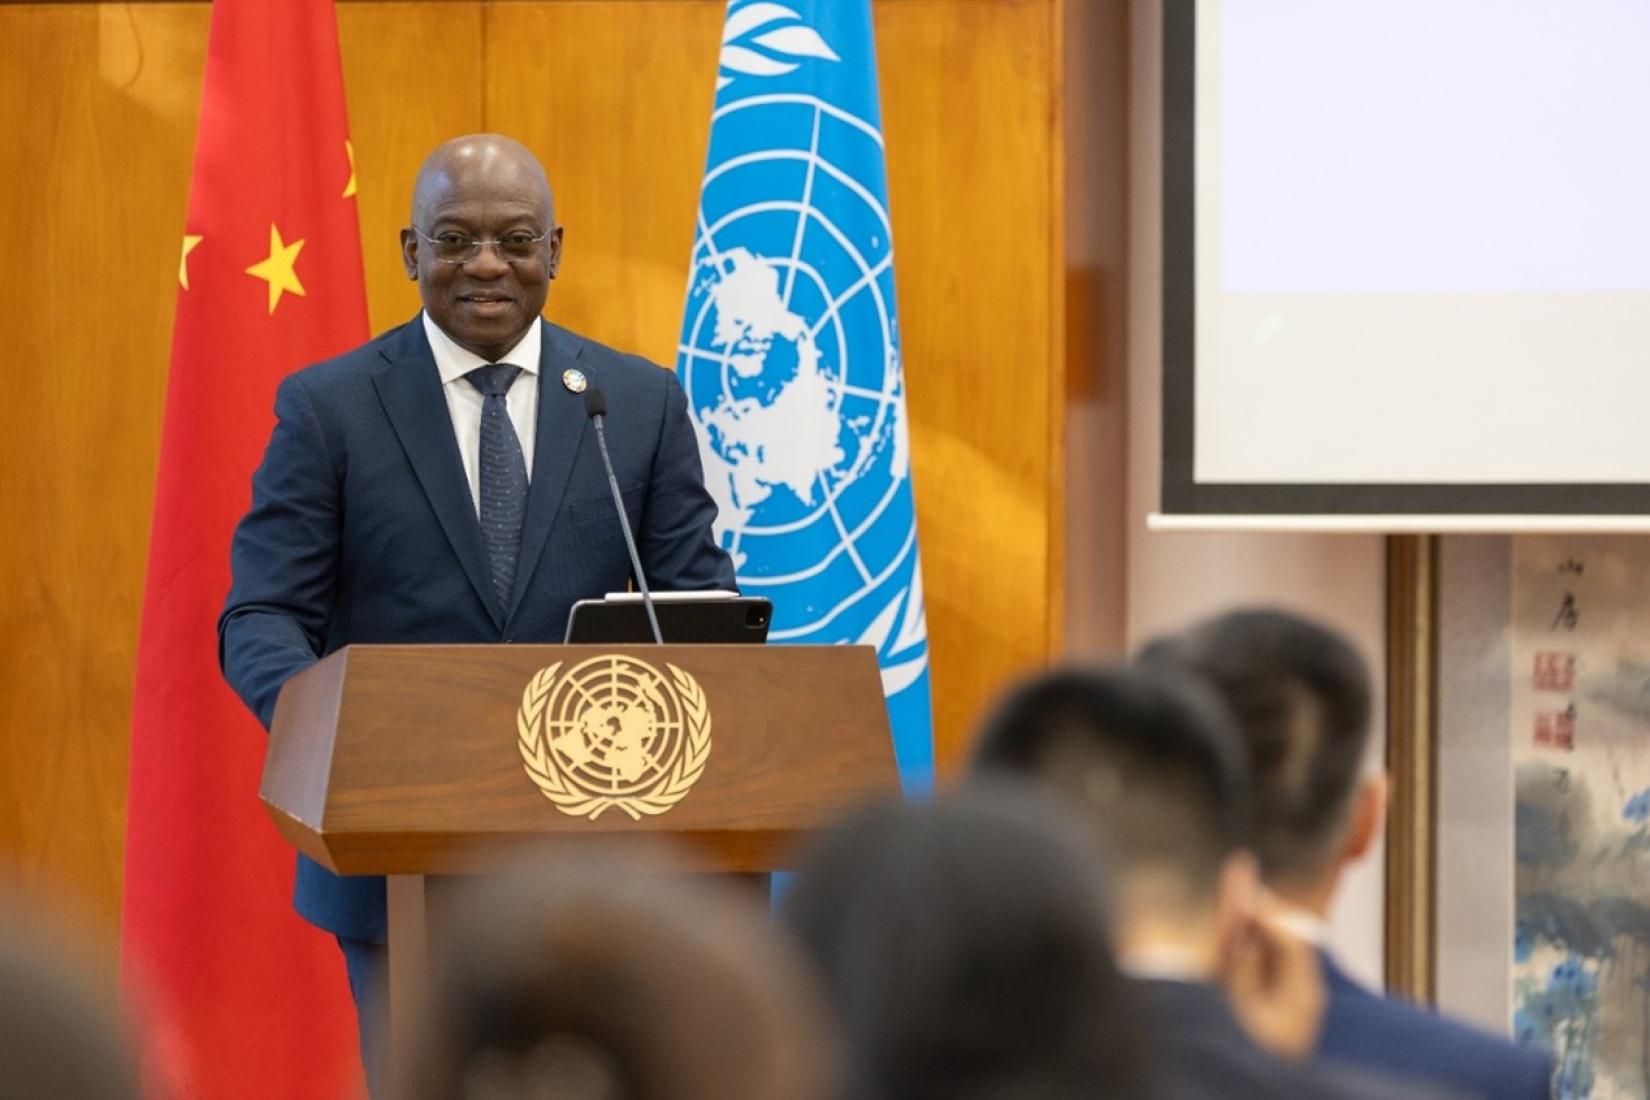 Nii Quaye-Kumah, IFAD Country Director and Head of the East Asia multi-country office, hosts the International Forum on Sci-Tech Empowering Rural Transformation - 2nd Event at the UN Compound in Beijing on Nov. 6, 2023. (Photo by Yang Jia/China.org.cn)